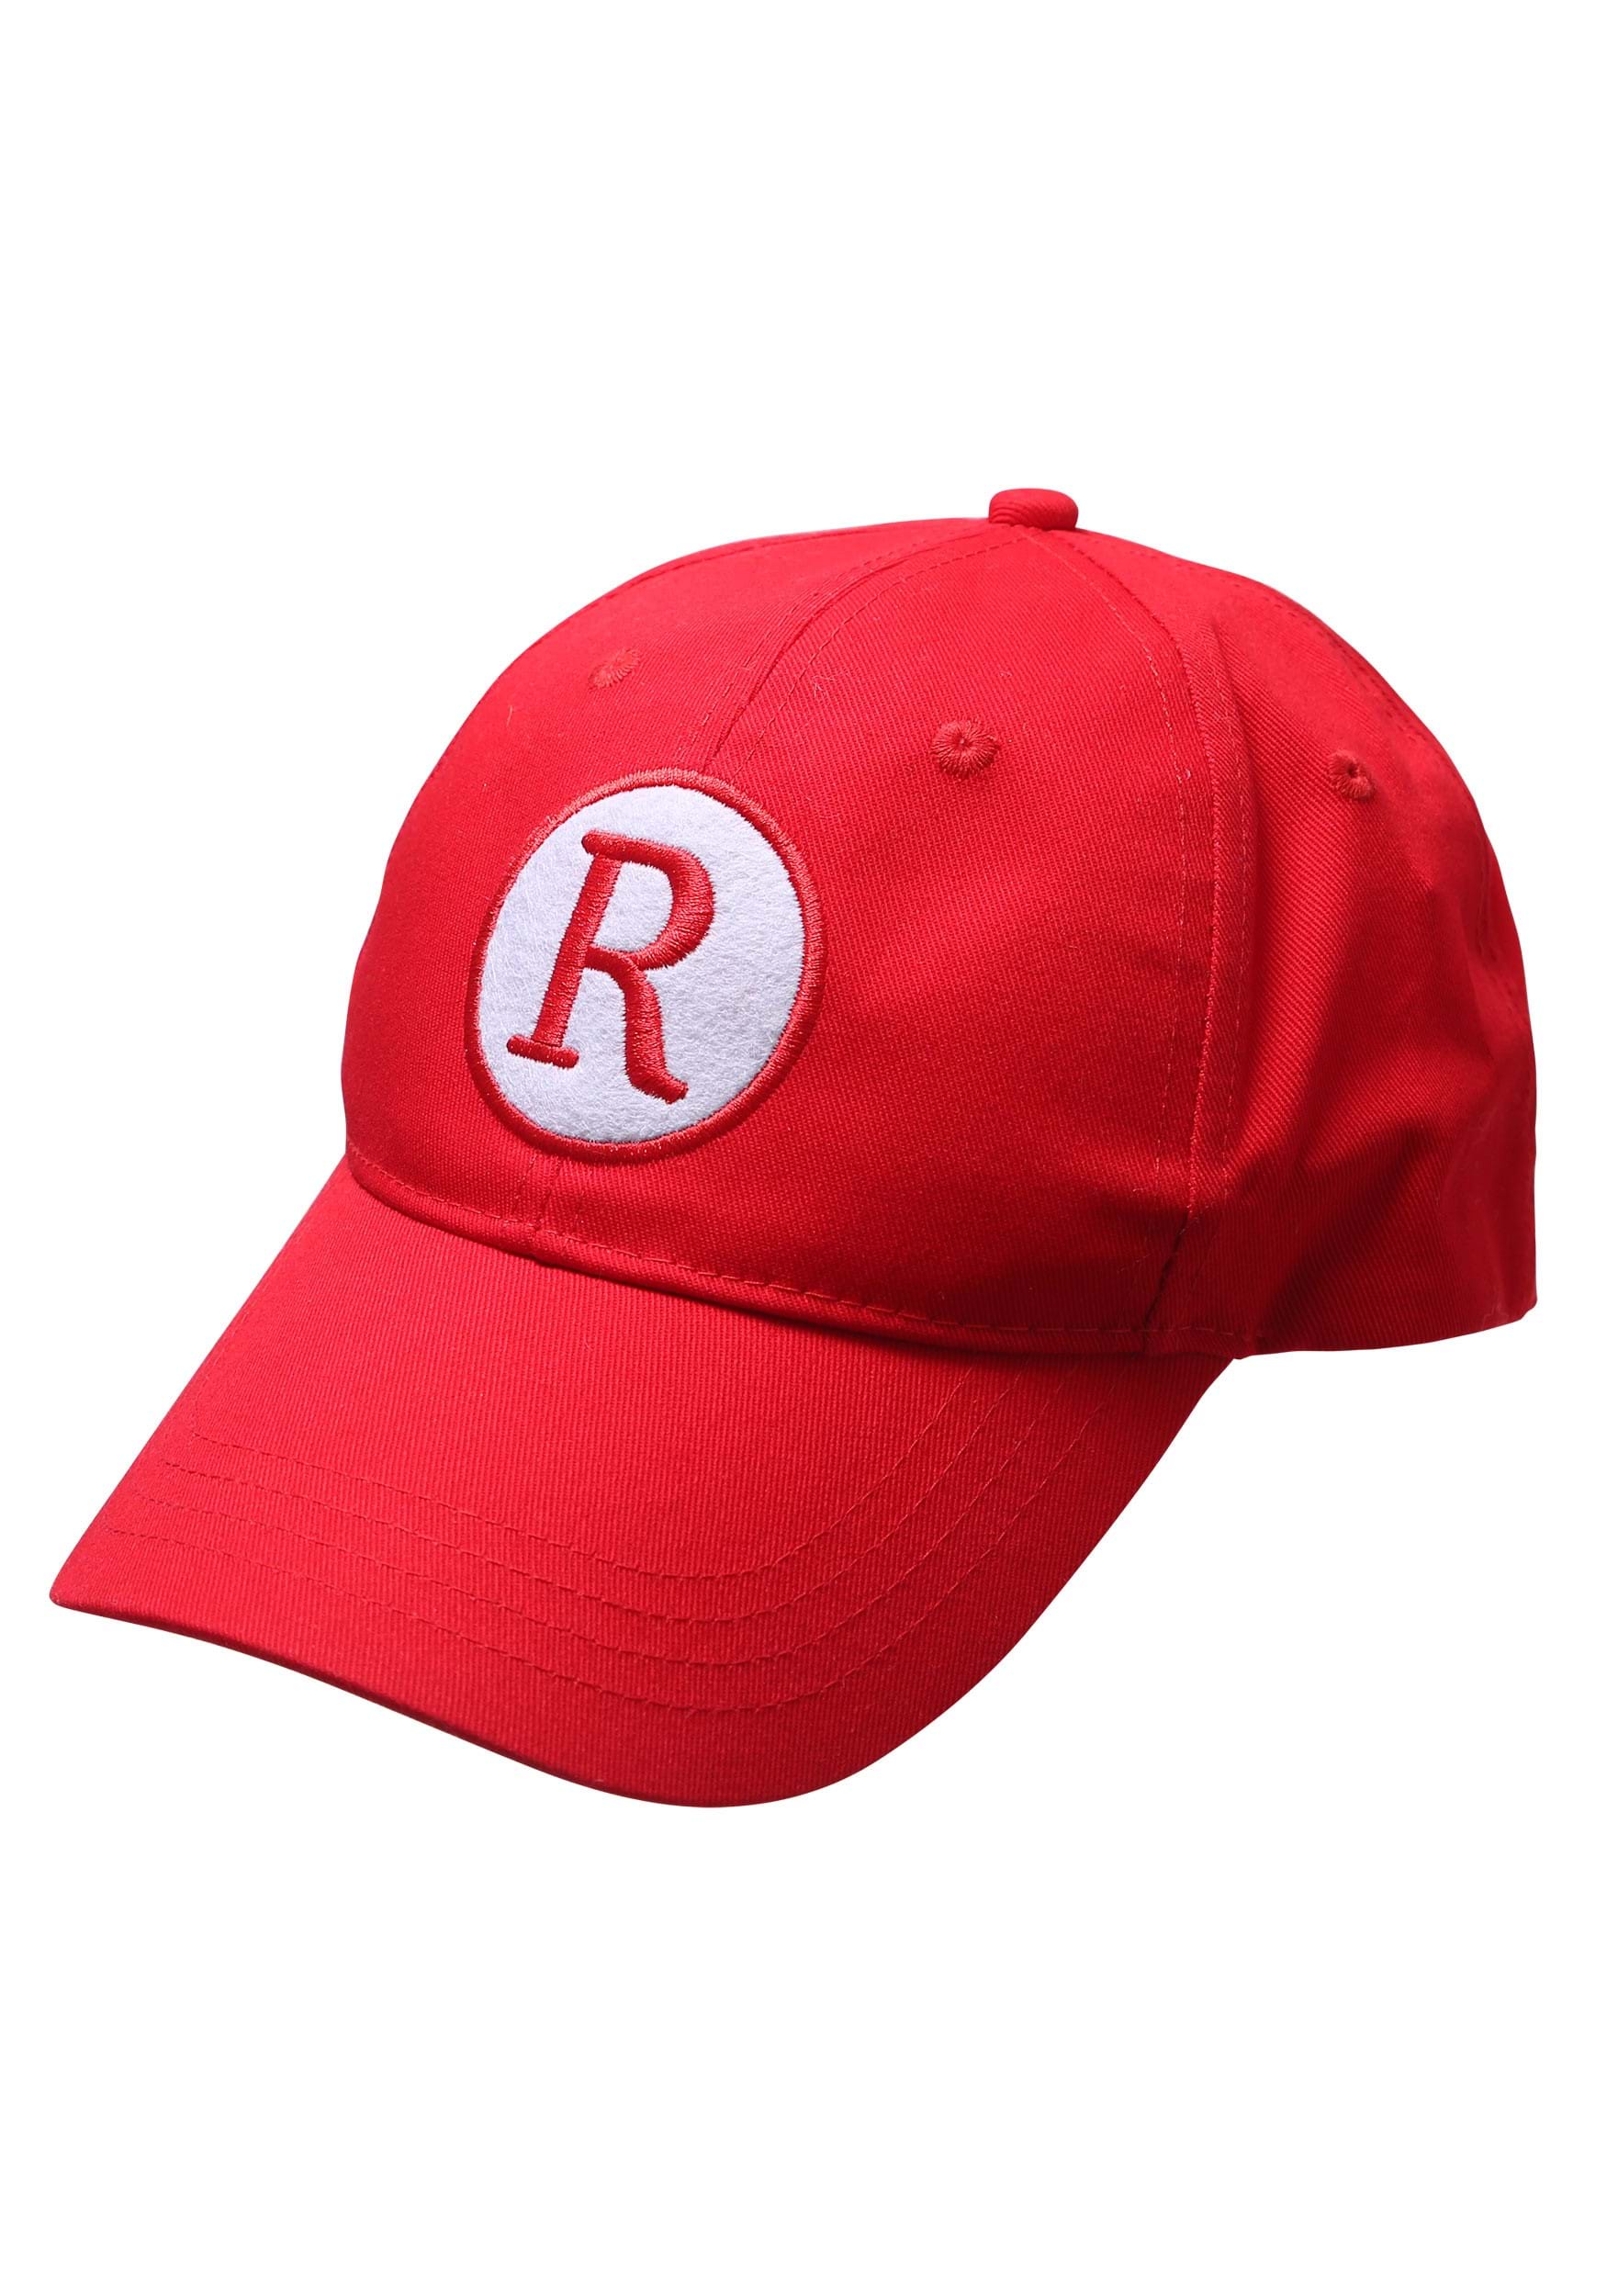 A League of Their Own Baseball Costume Hat for Adults